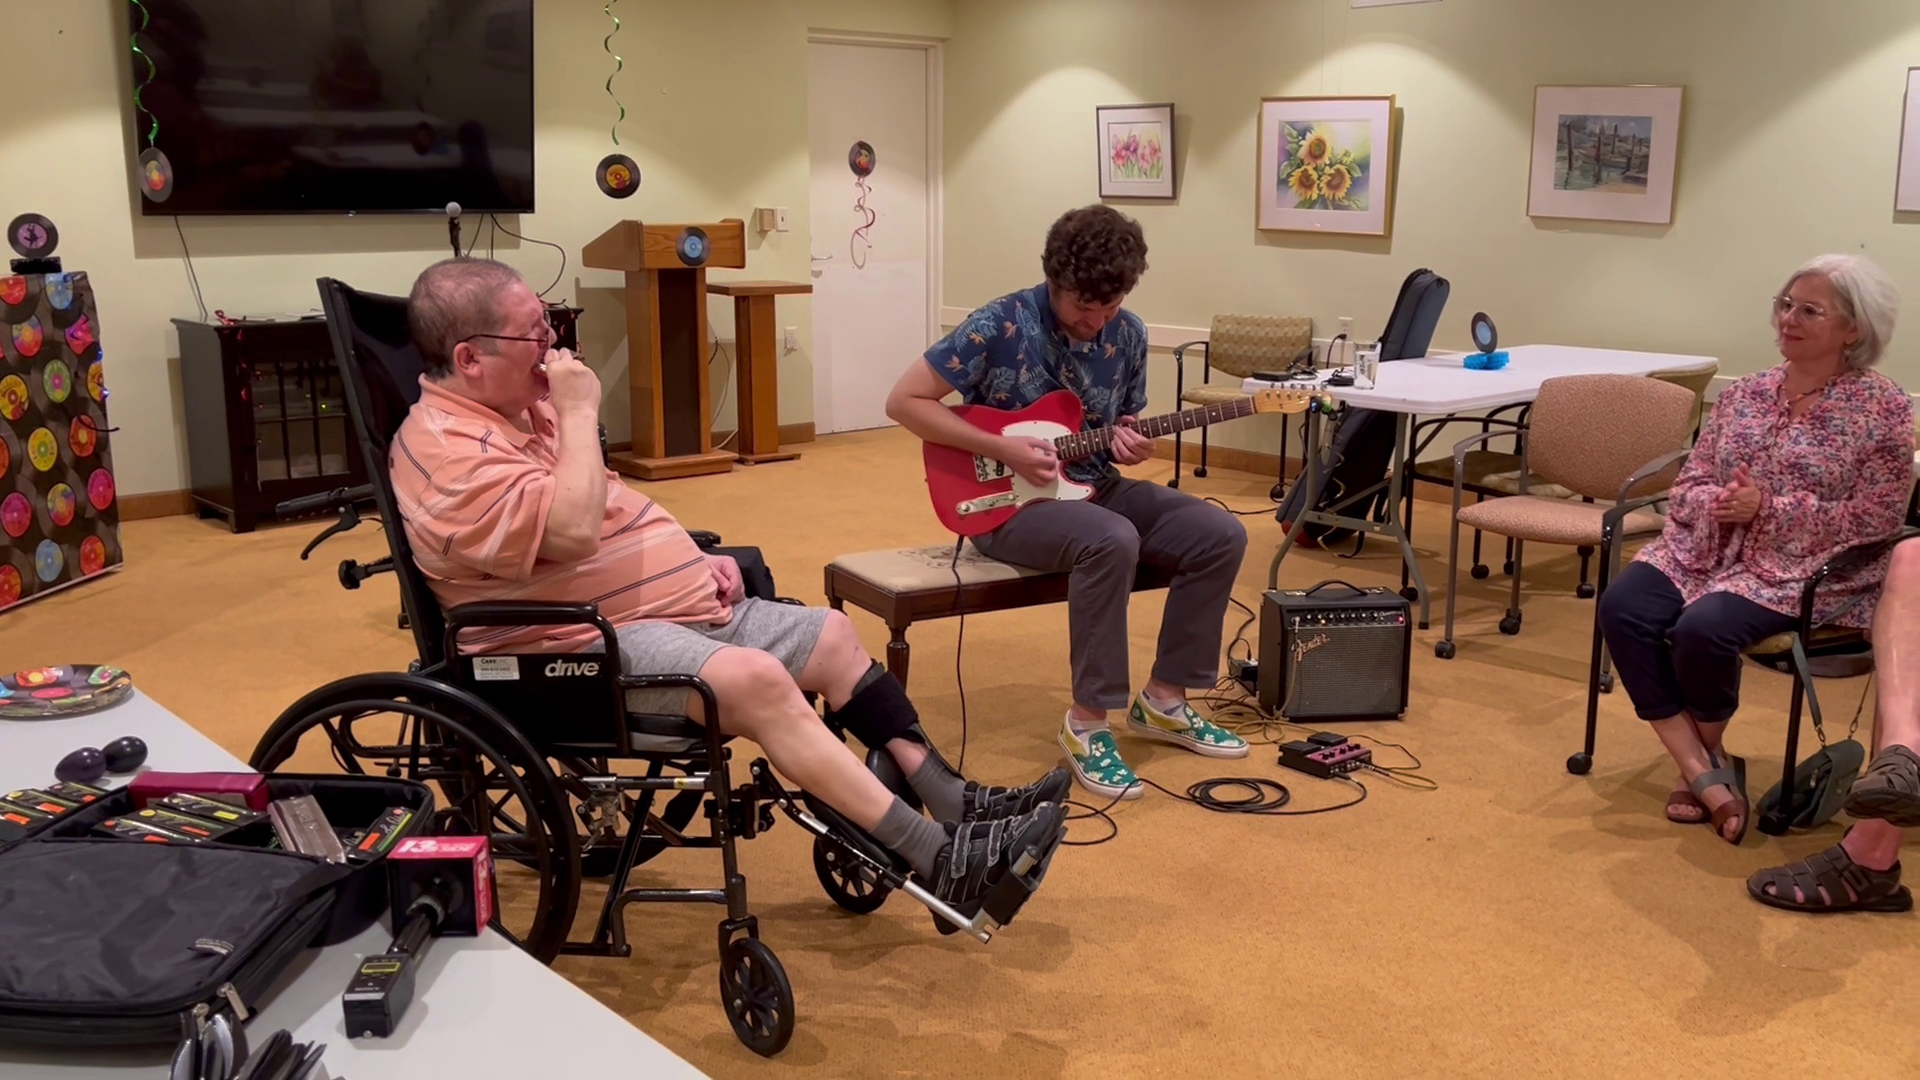 Peter Paolini is in hospice in Grand Rapids for an epidermoid tumor. His family, pizza in tow, surrounded him for a blues jam session.